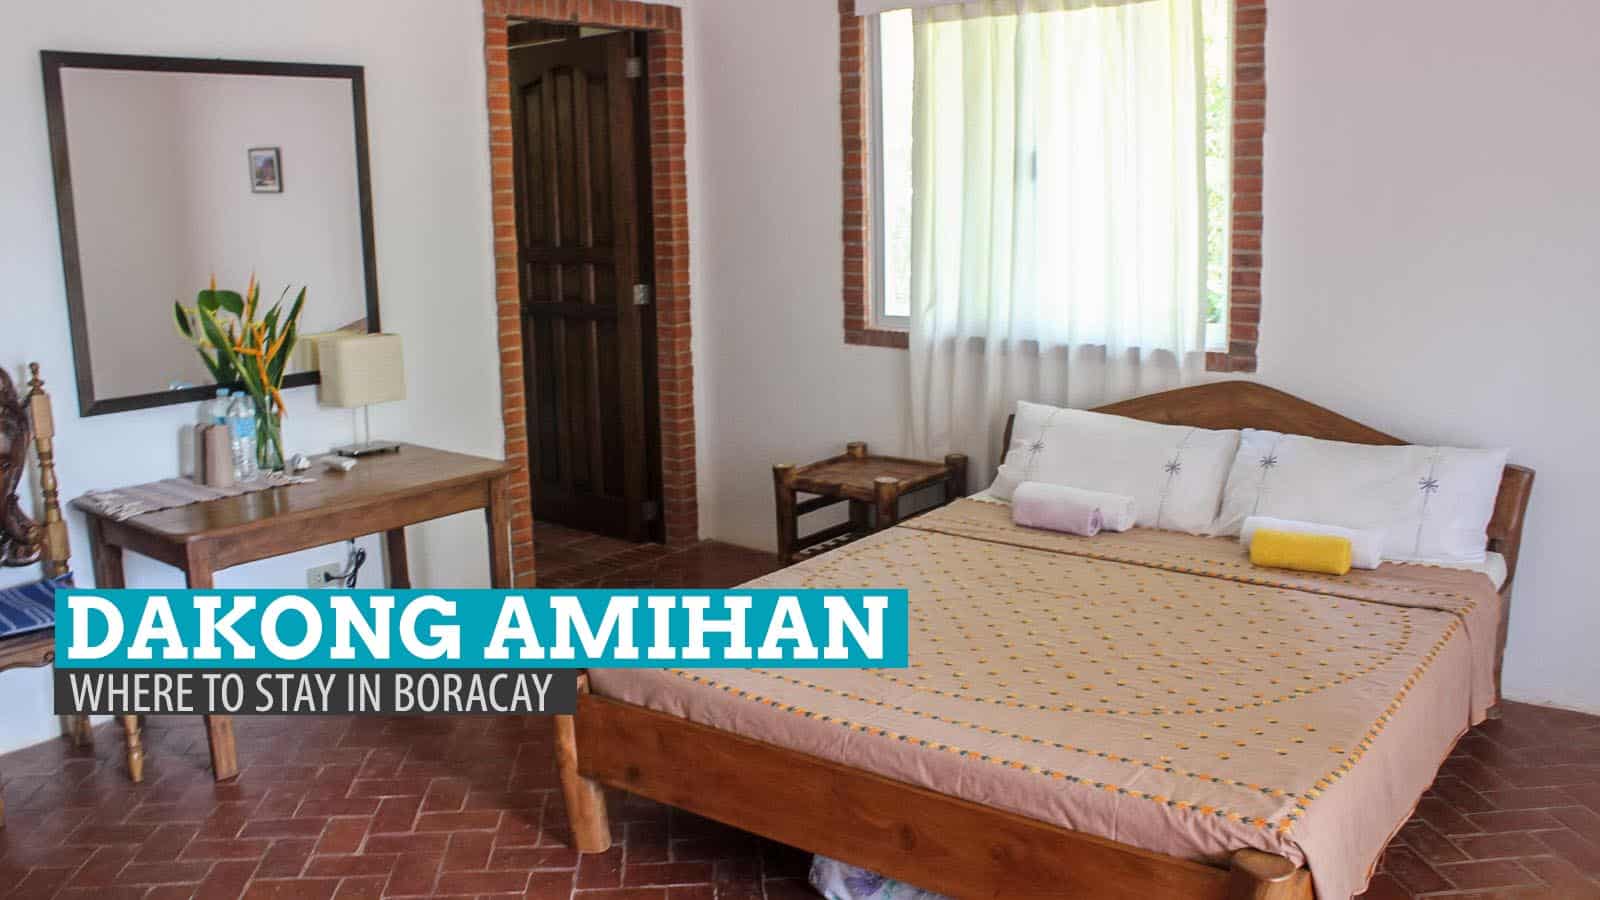 Amihan Home (Bed & Breakfast): Where to Stay in Boracay, Philippines